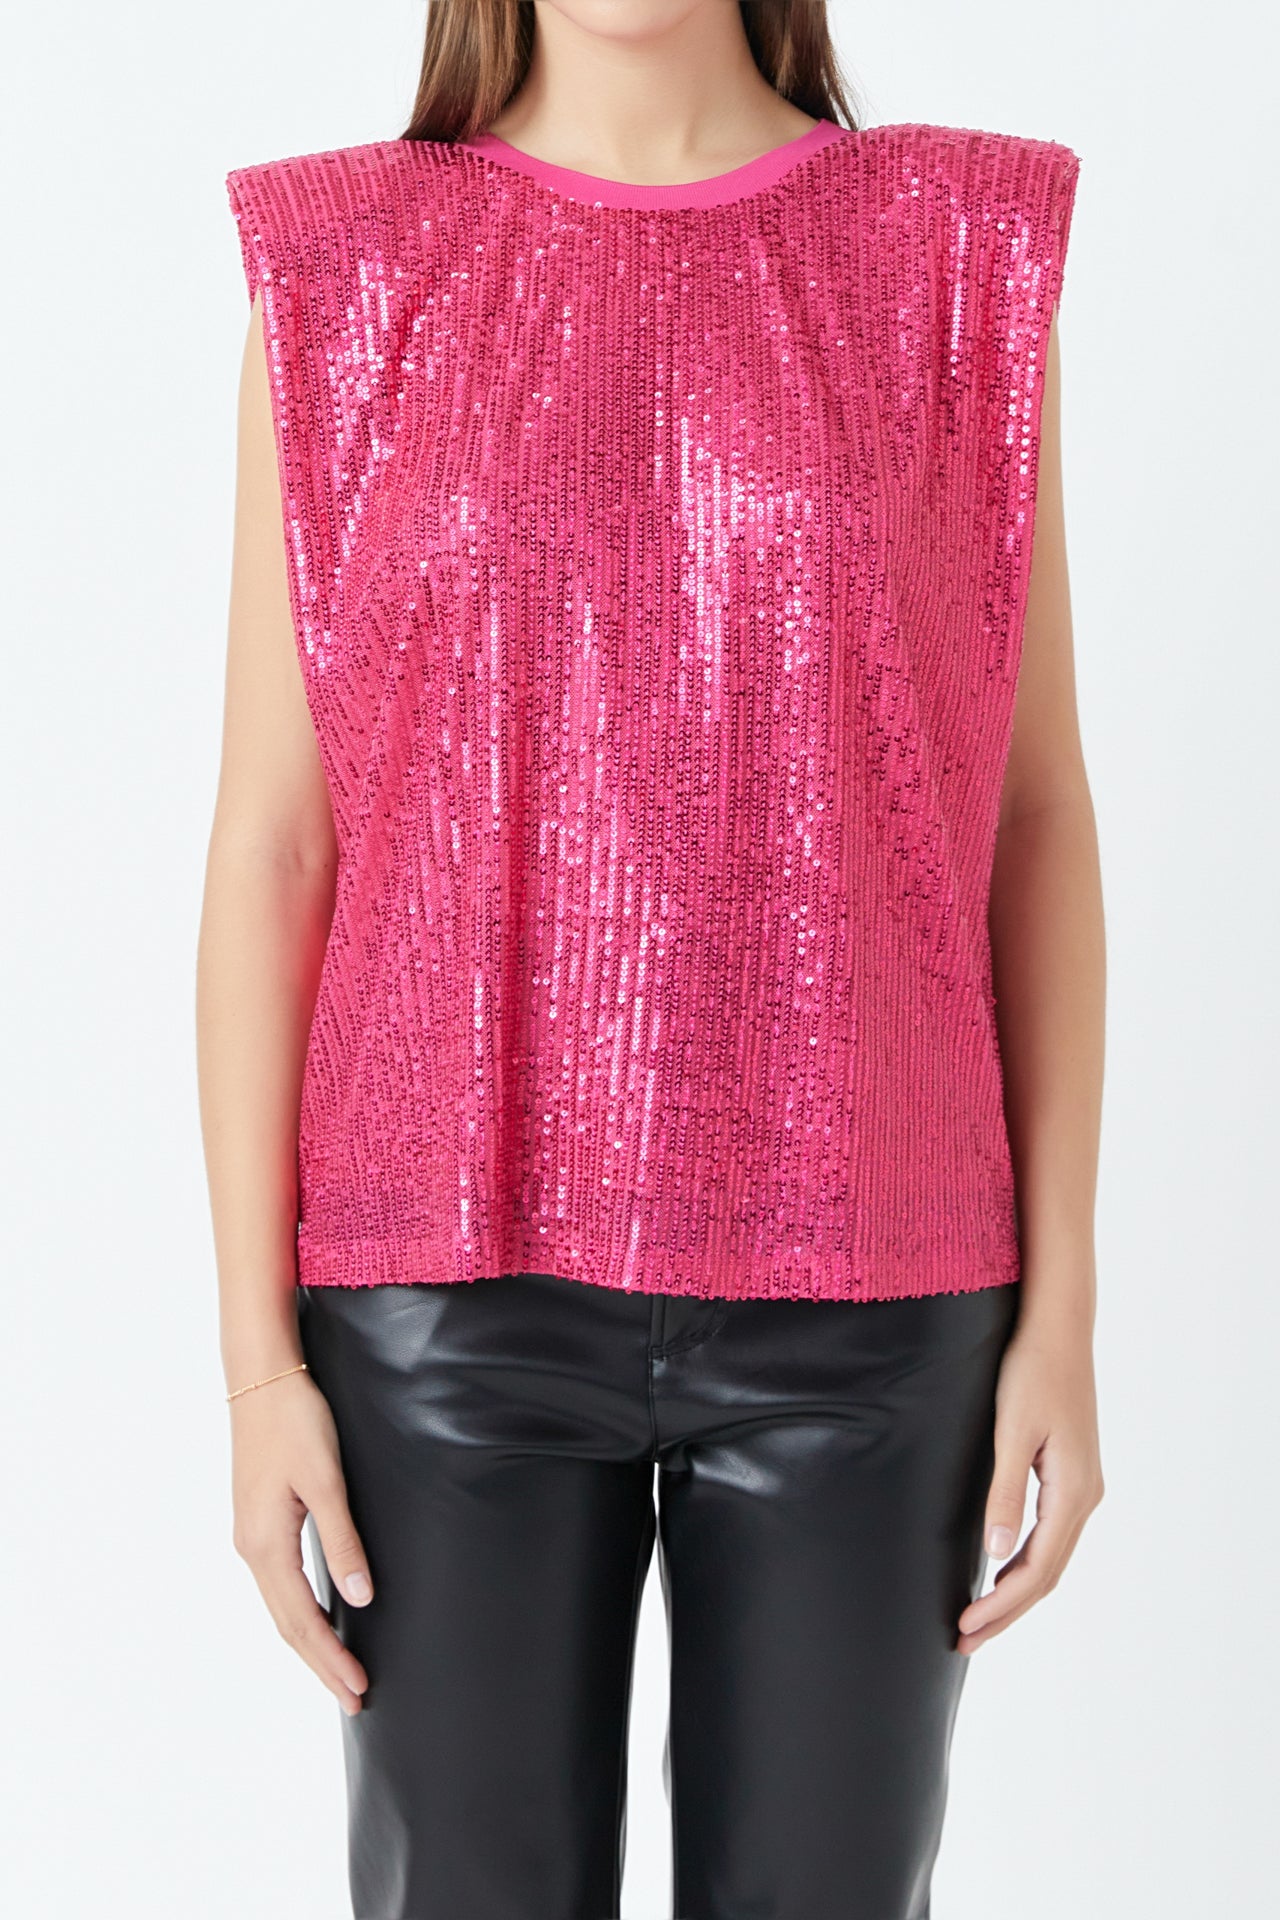 ENDLESS ROSE - Sequin Shoulder Pad Top - TOPS available at Objectrare